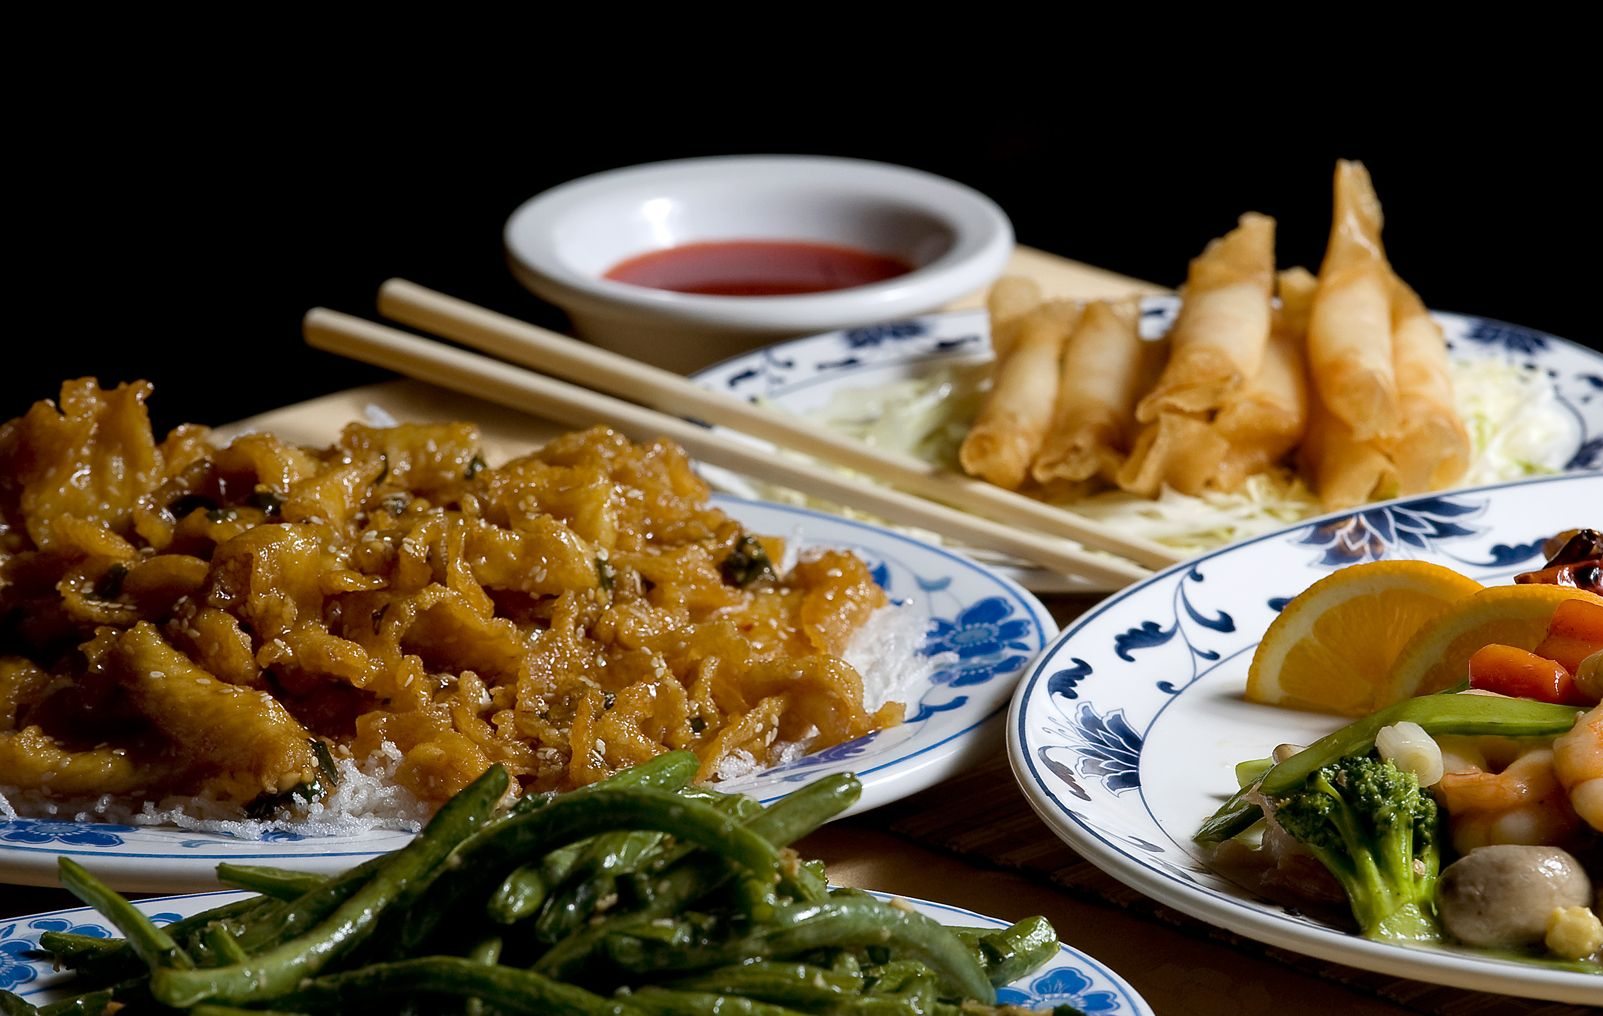 The Crispy Shrimp Rolls (clockwise from top), Dragon and Phoenix, Sauteed String Beans and Sesame Chicken were memorable dishes at the Golden City.